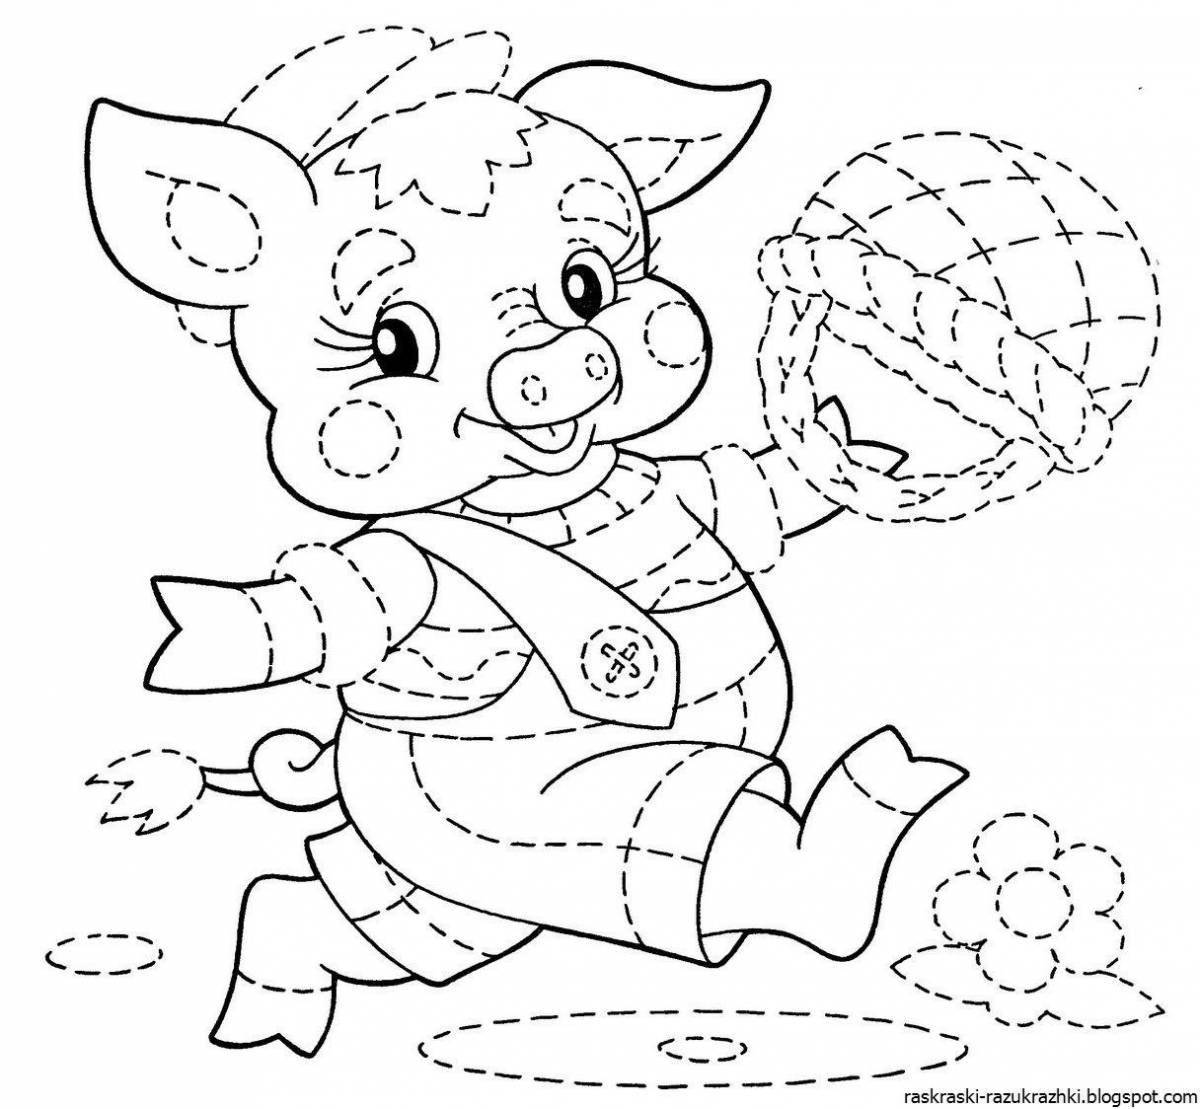 Lively coloring book interesting for children